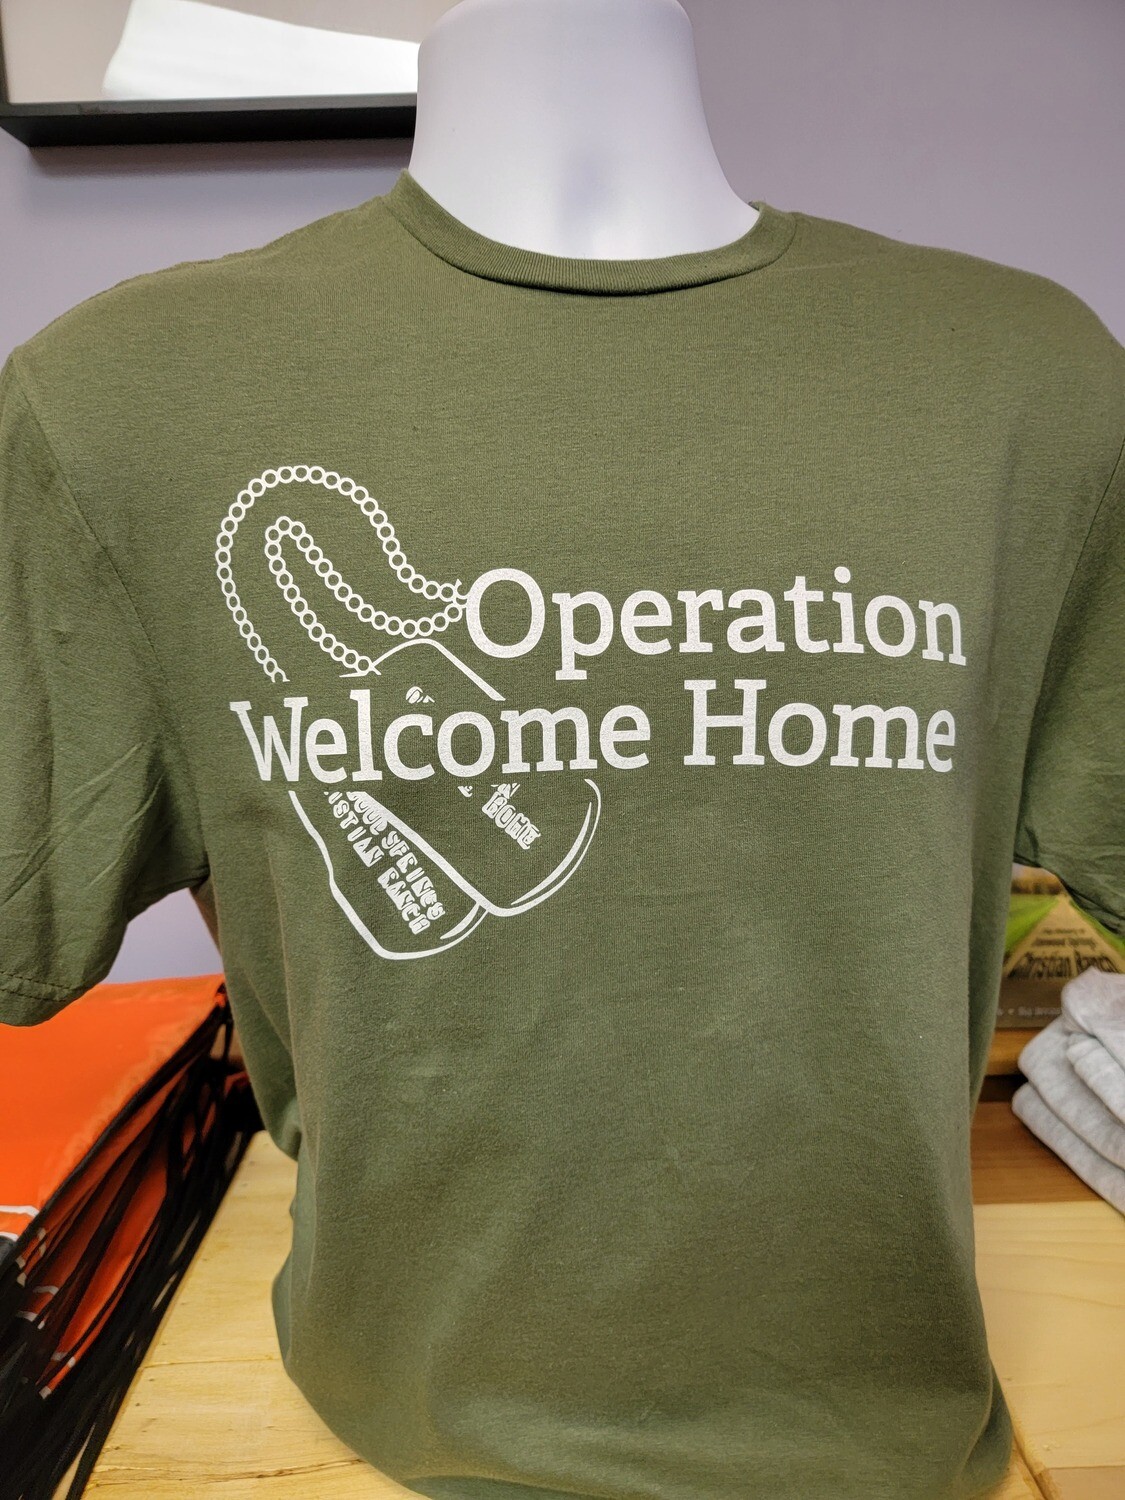 Home - Operation Welcome Home